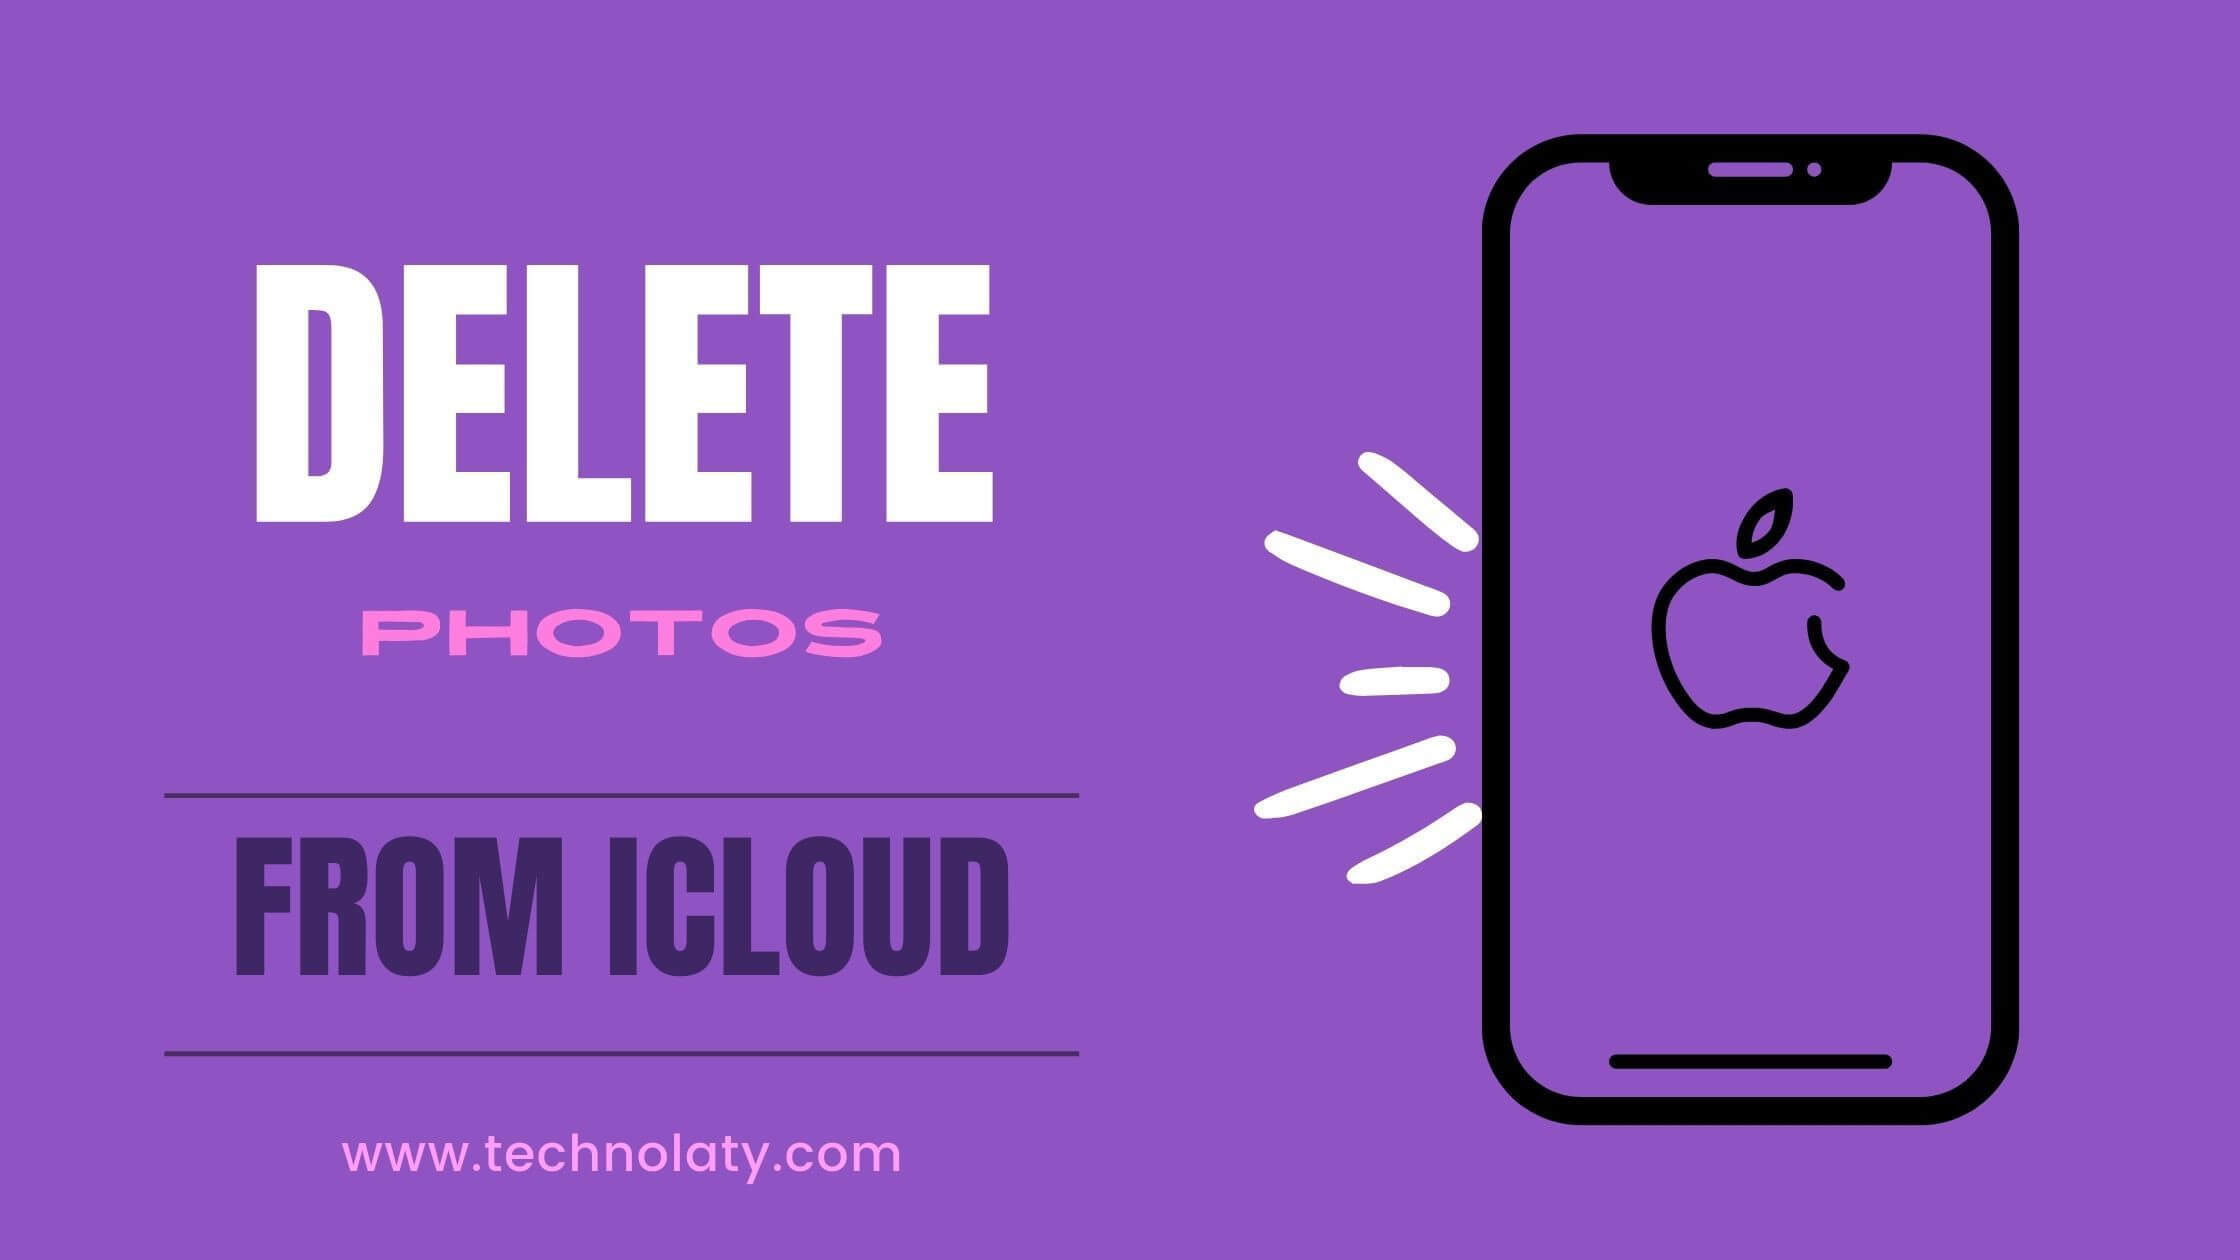 Delete photos from icloud at once